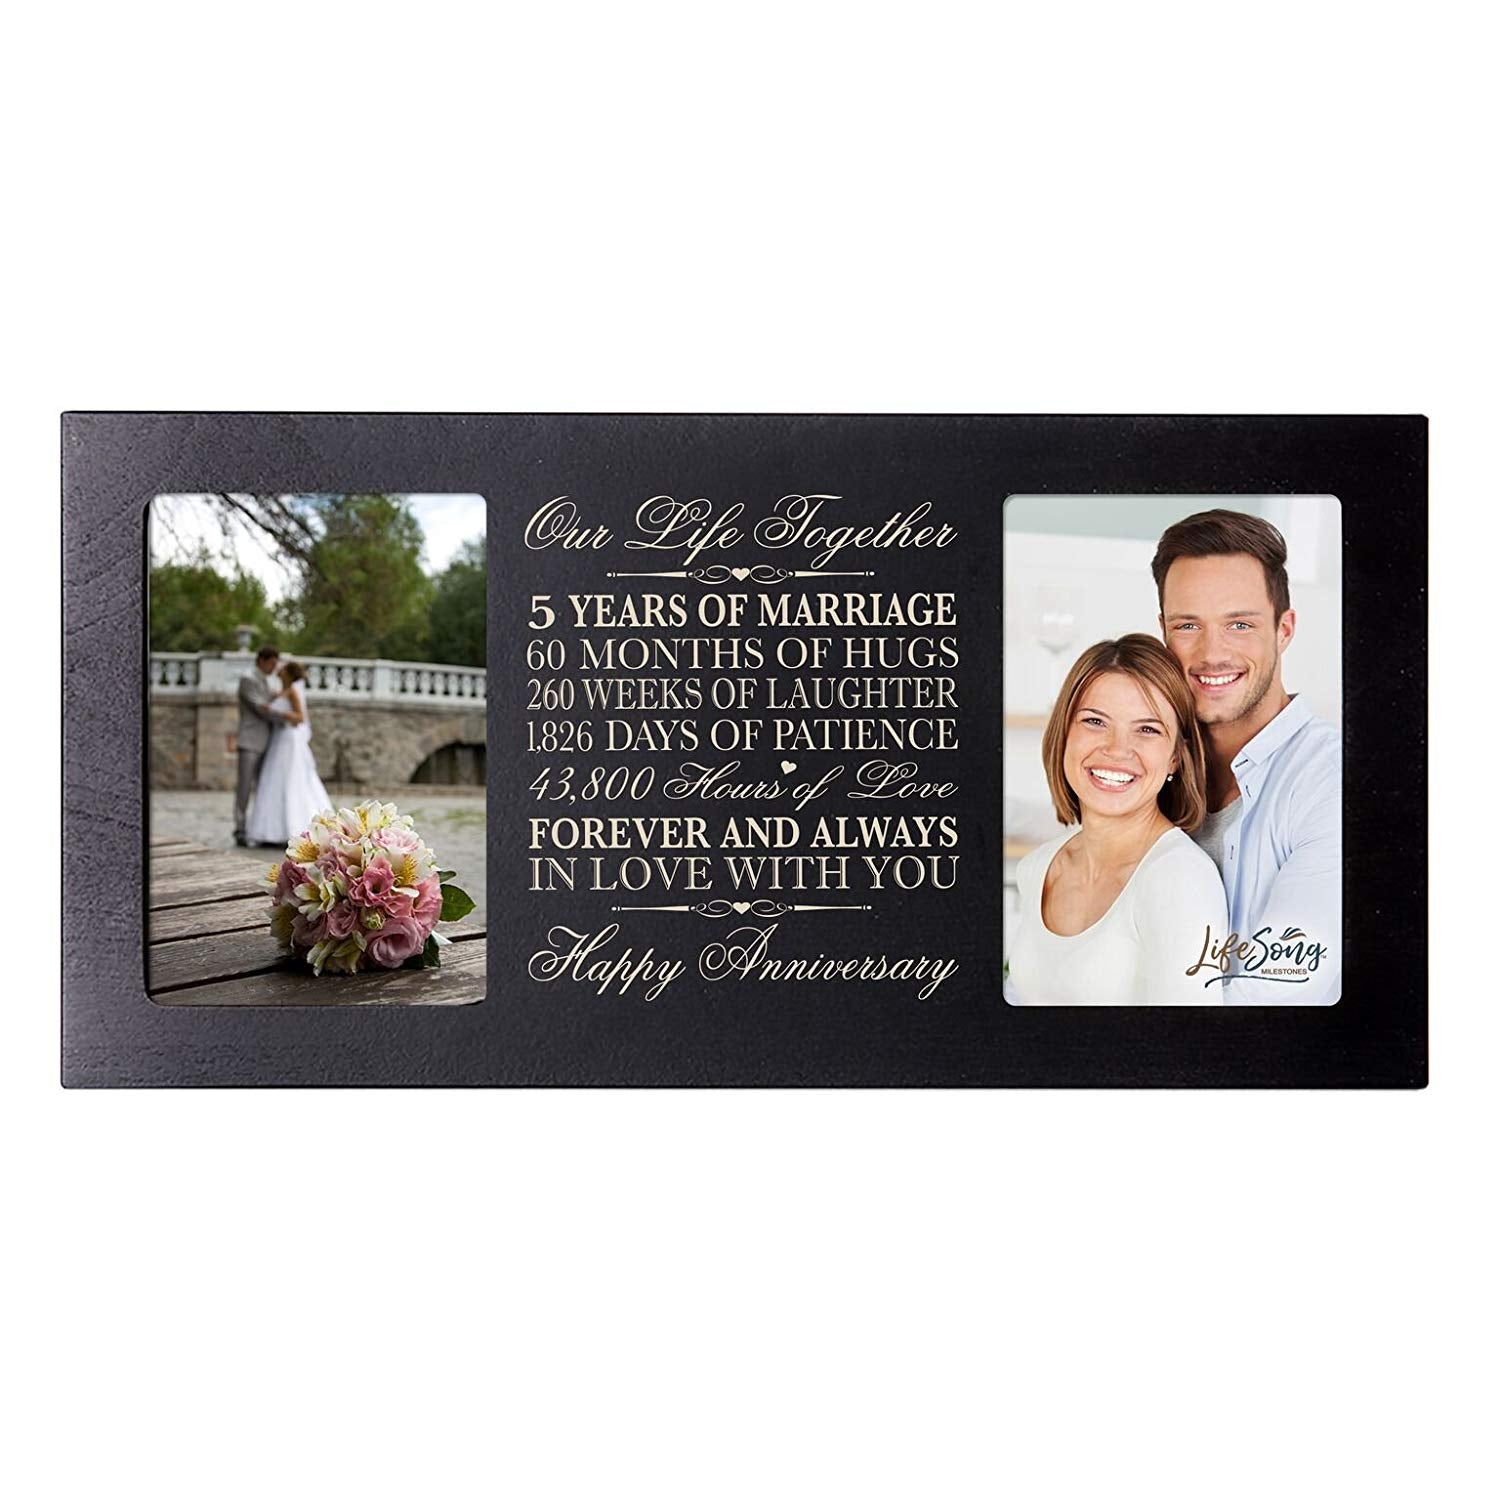 LifeSong Milestones 5th Wedding Anniversary Picture frame Gift with anniversary dates holds 2 4x6 photos - LifeSong Milestones